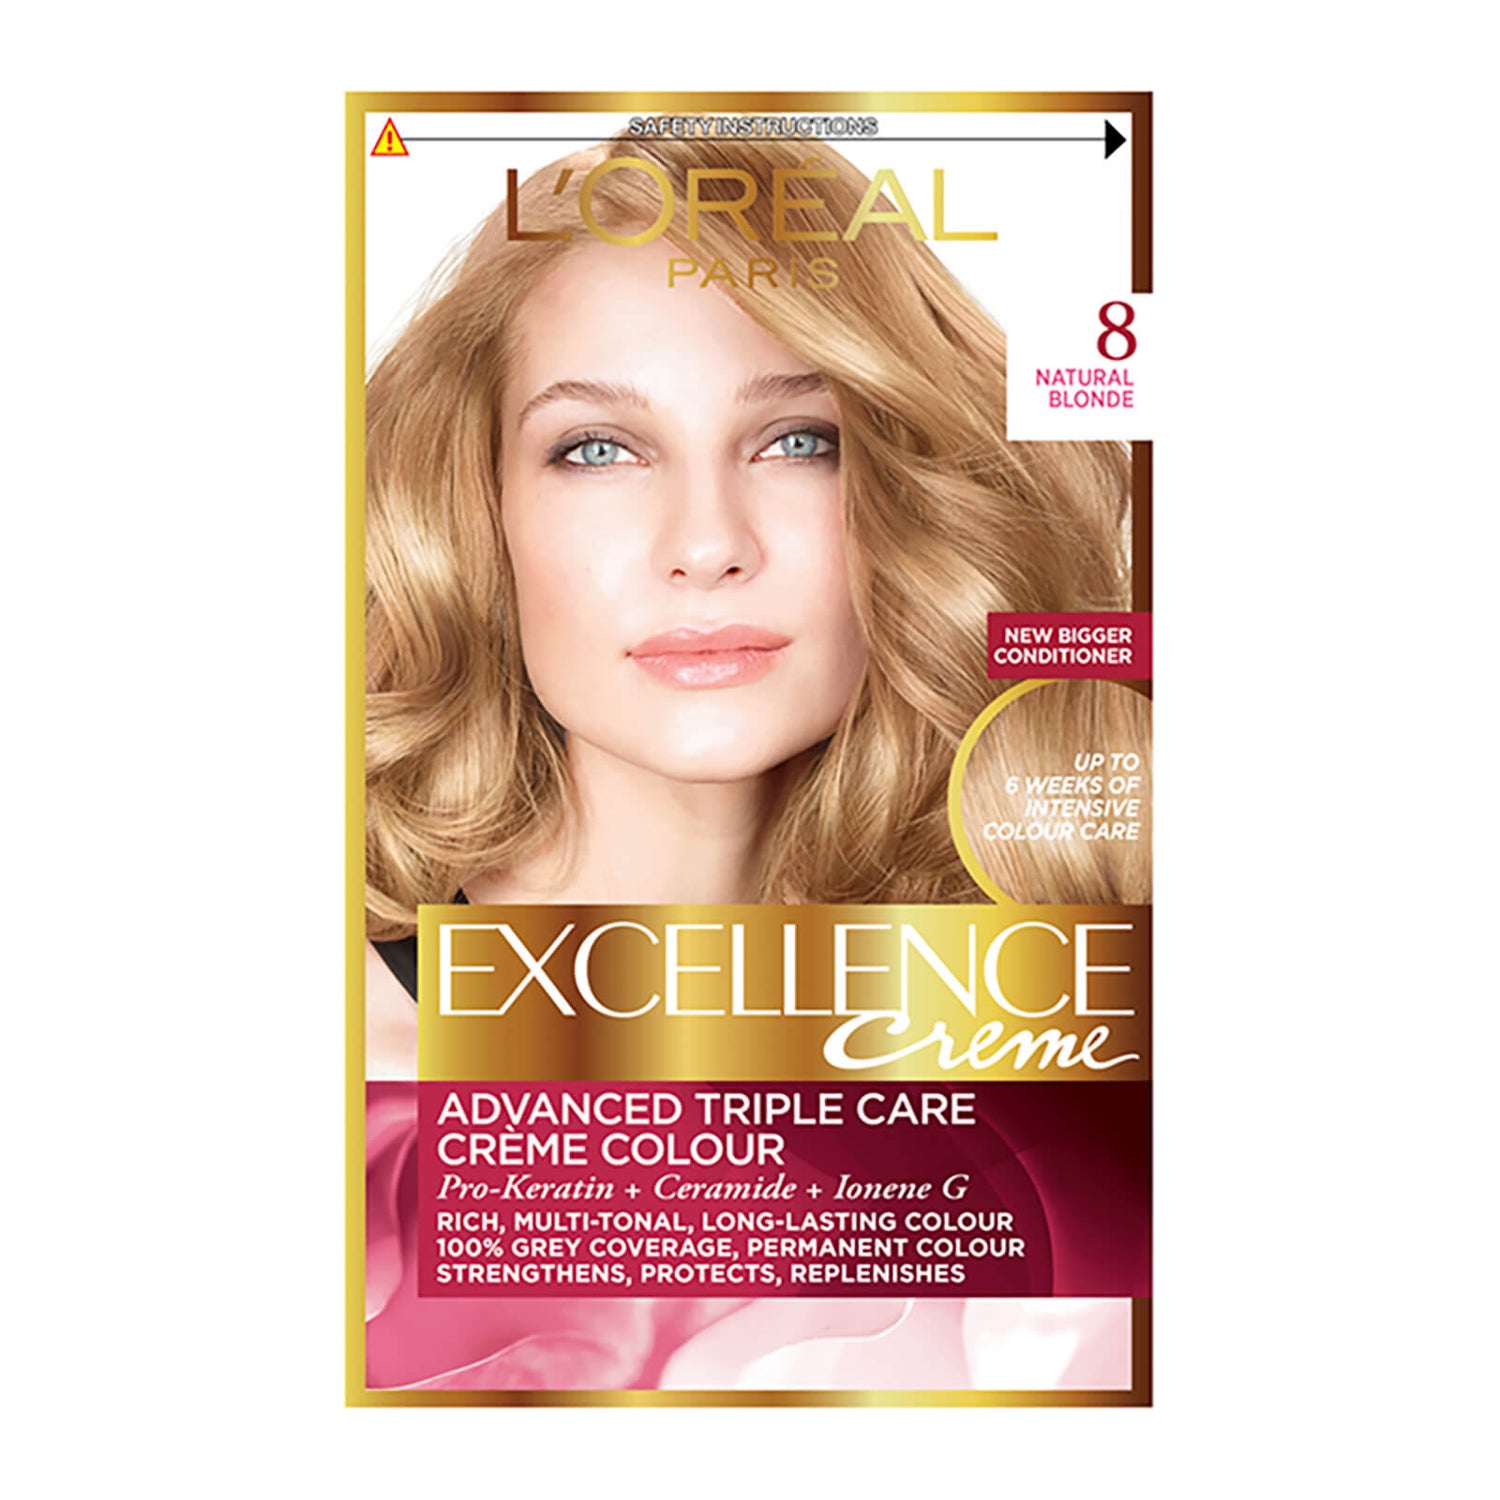 Loreal Hair Color Color Chart